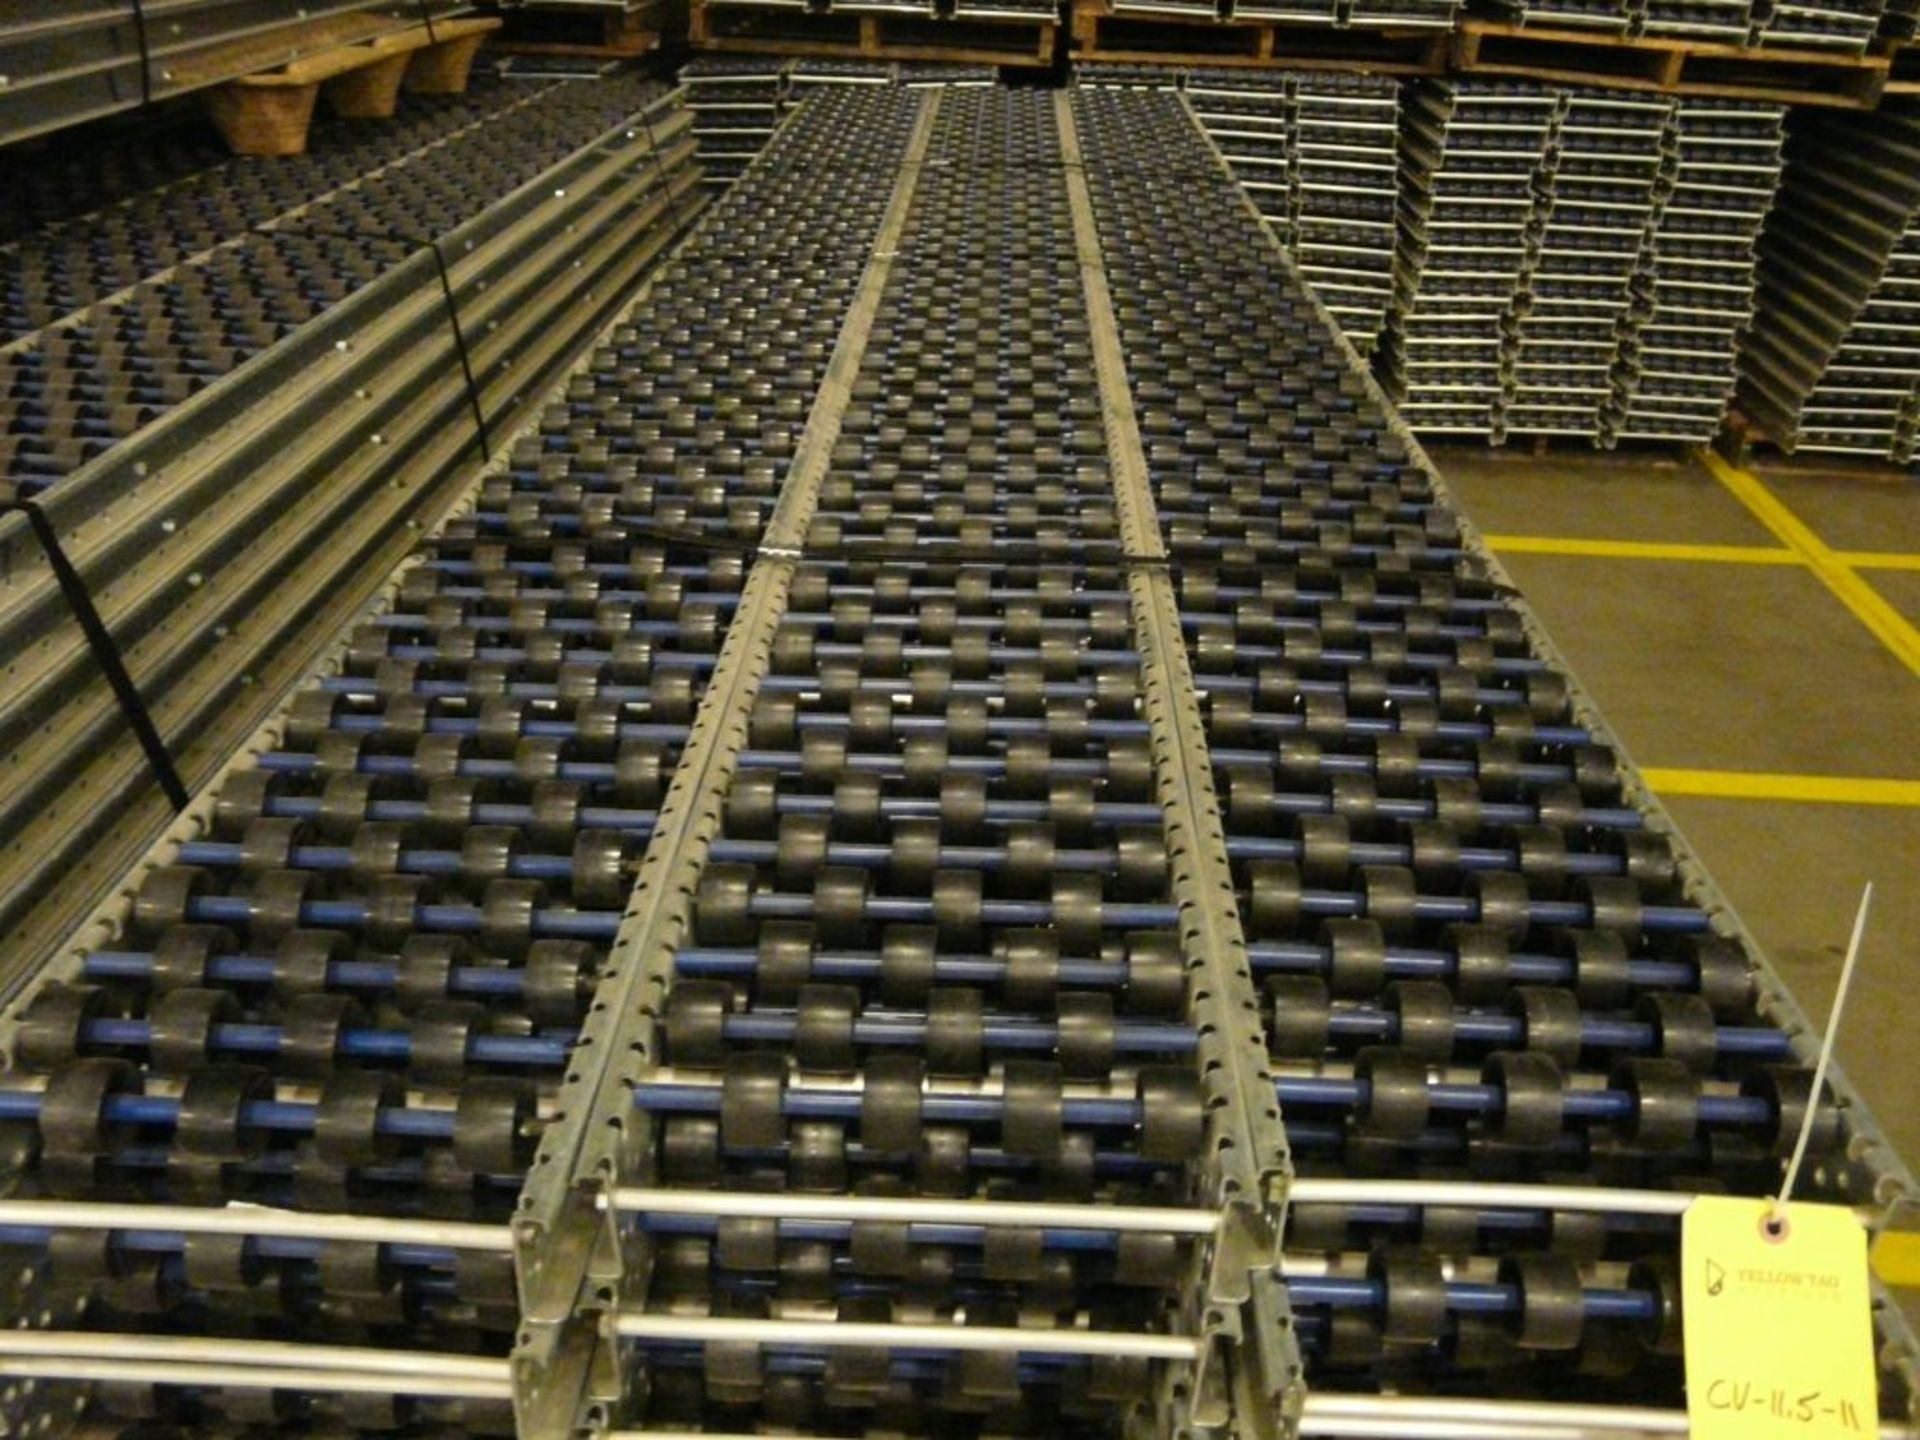 Lot of (90) SpanTrack Wheelbed Carton Flow Conveyors - 11.5'L x 11"W; Tag: 223629 - $30 Lot - Image 3 of 4